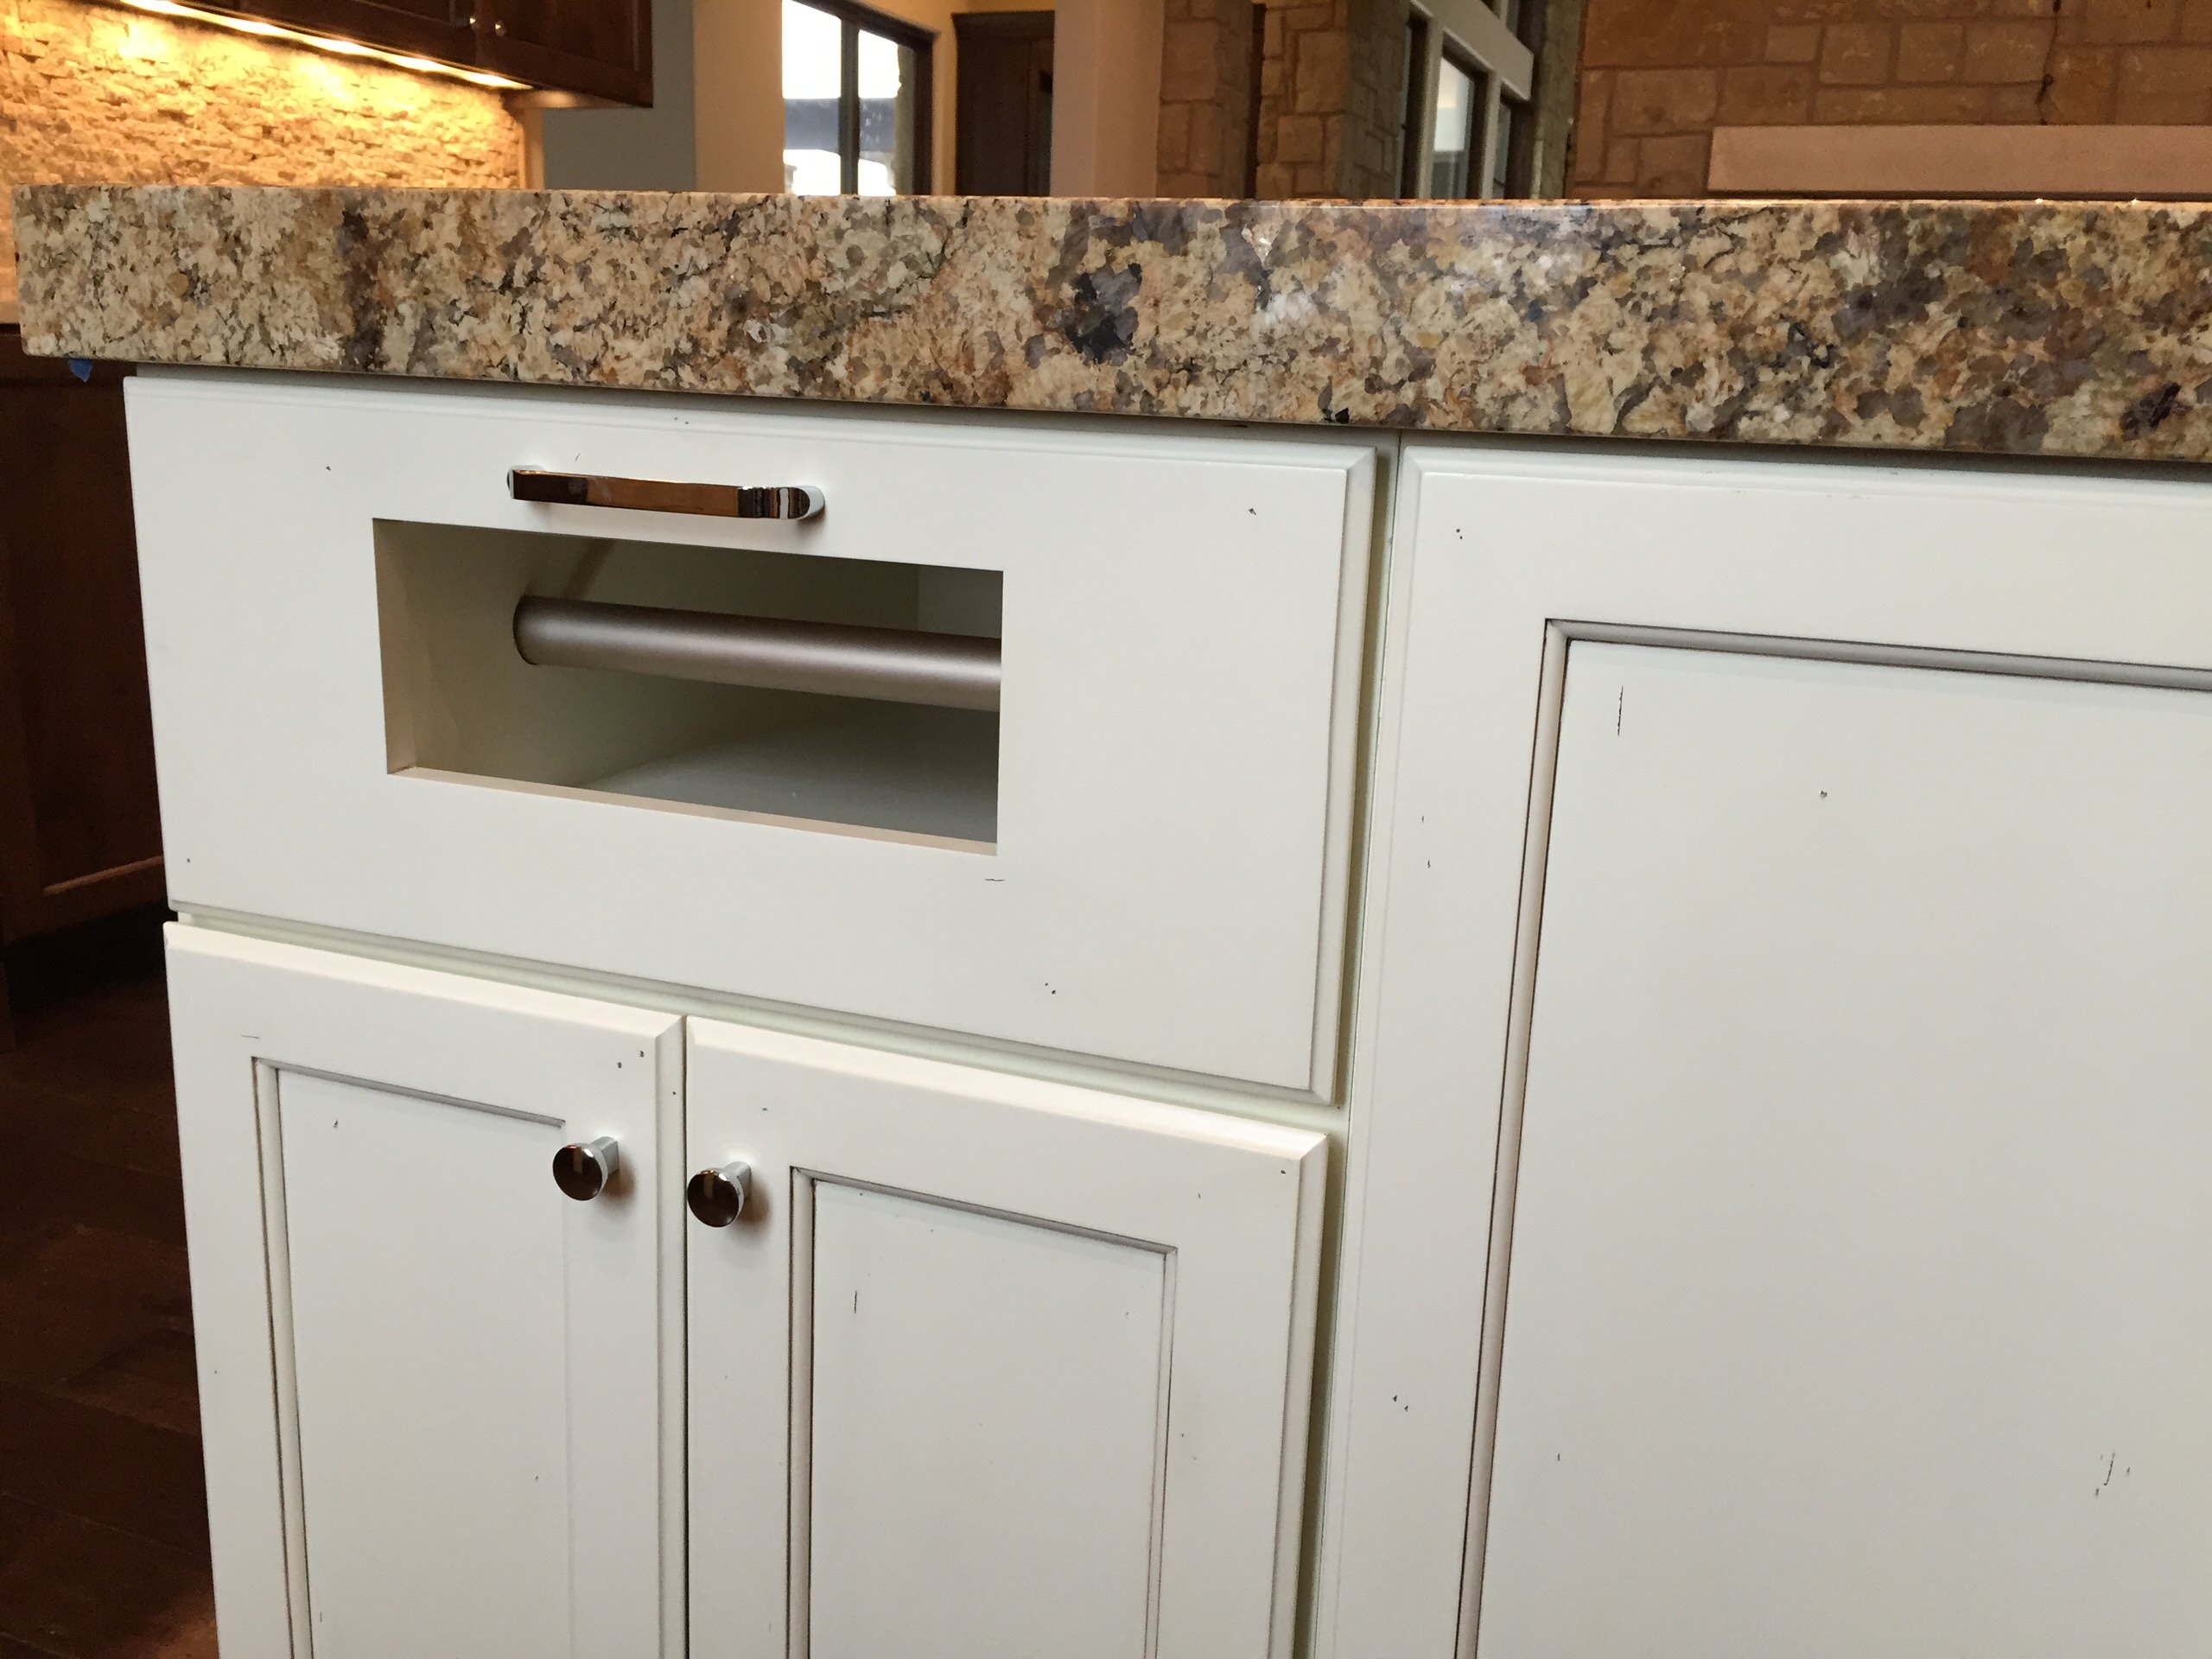 https://st.hzcdn.com/simgs/pictures/kitchens/paper-towel-drawer-closed-unico-design-cabinetry-llc-img~40118ec304f38a31_14-7144-1-8499e3b.jpg